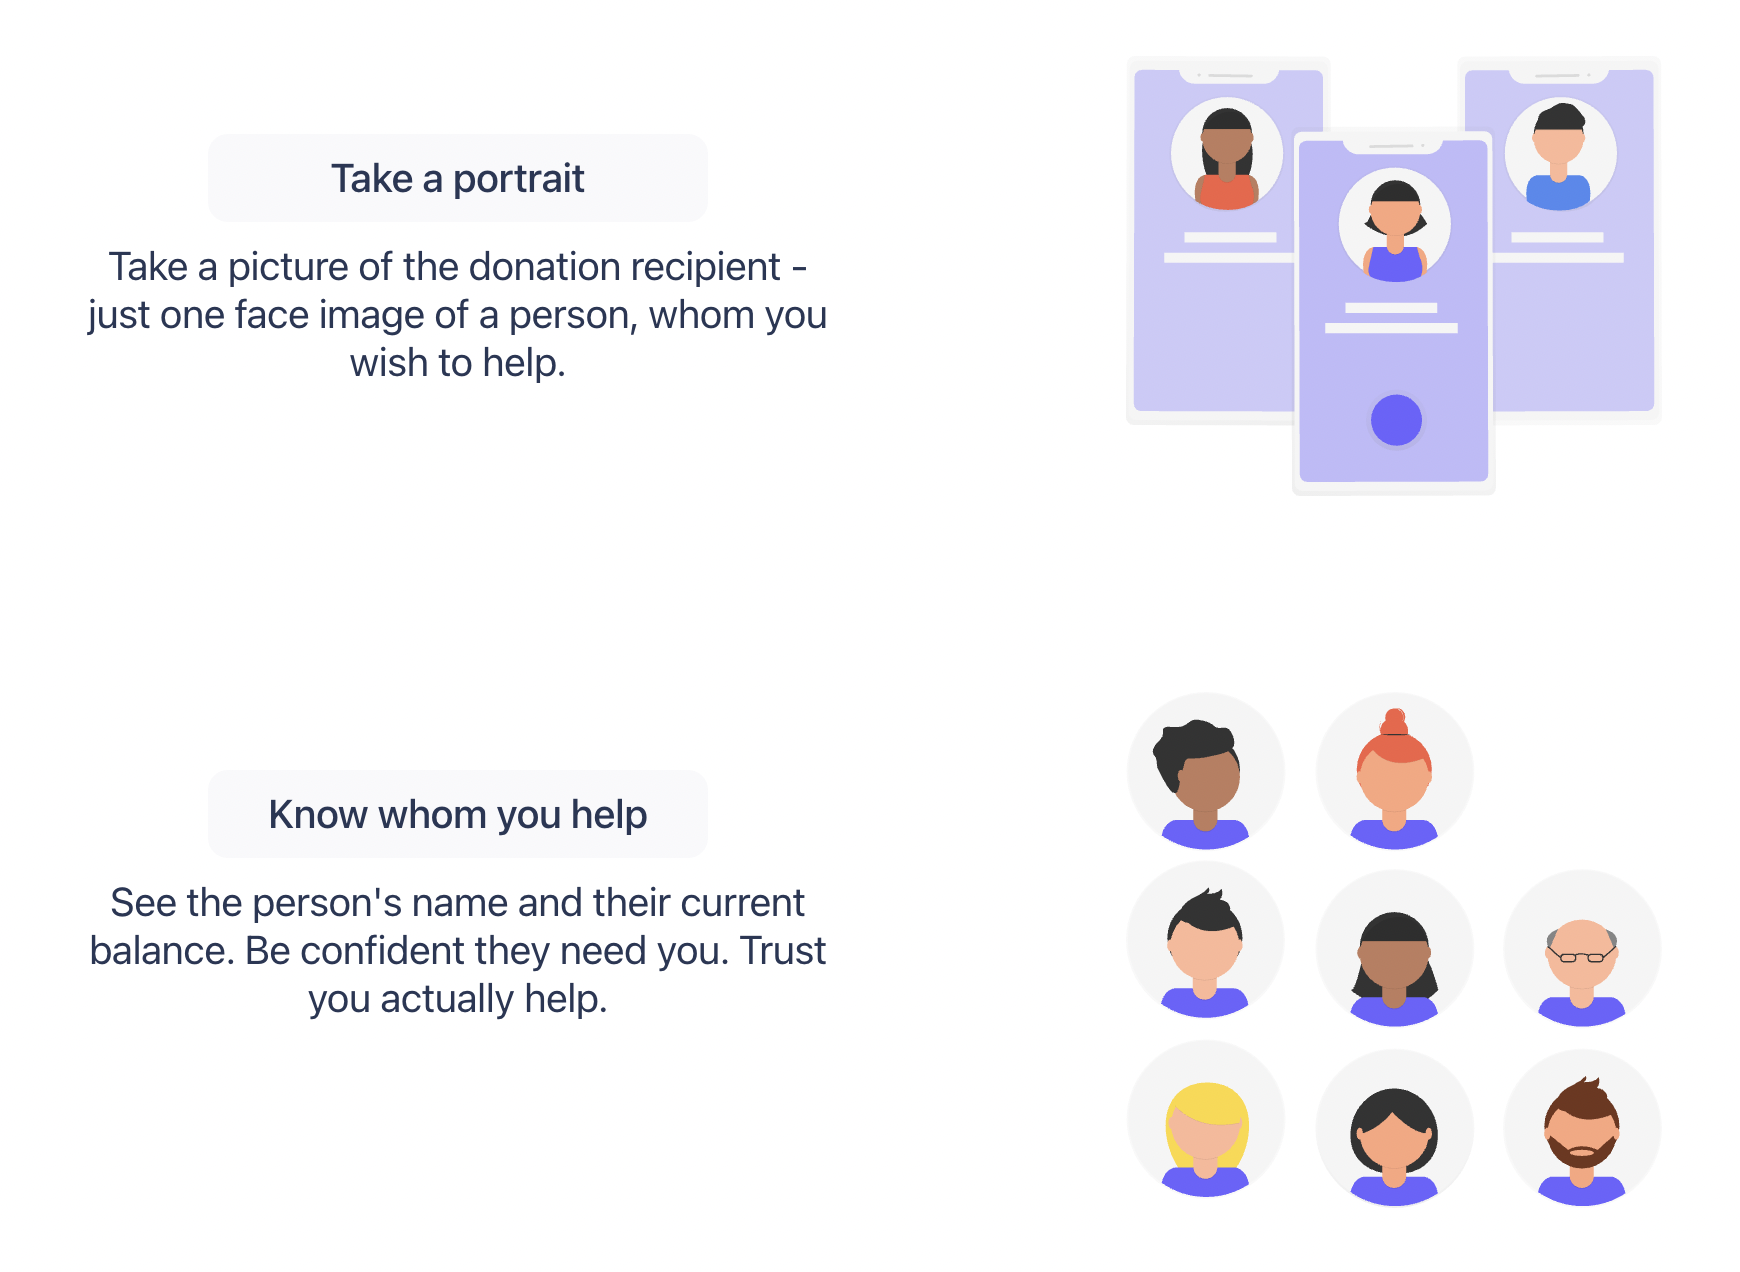 Fig 6. Instagram advert I received for Face Donate (left) and a screenshot from their website (right).